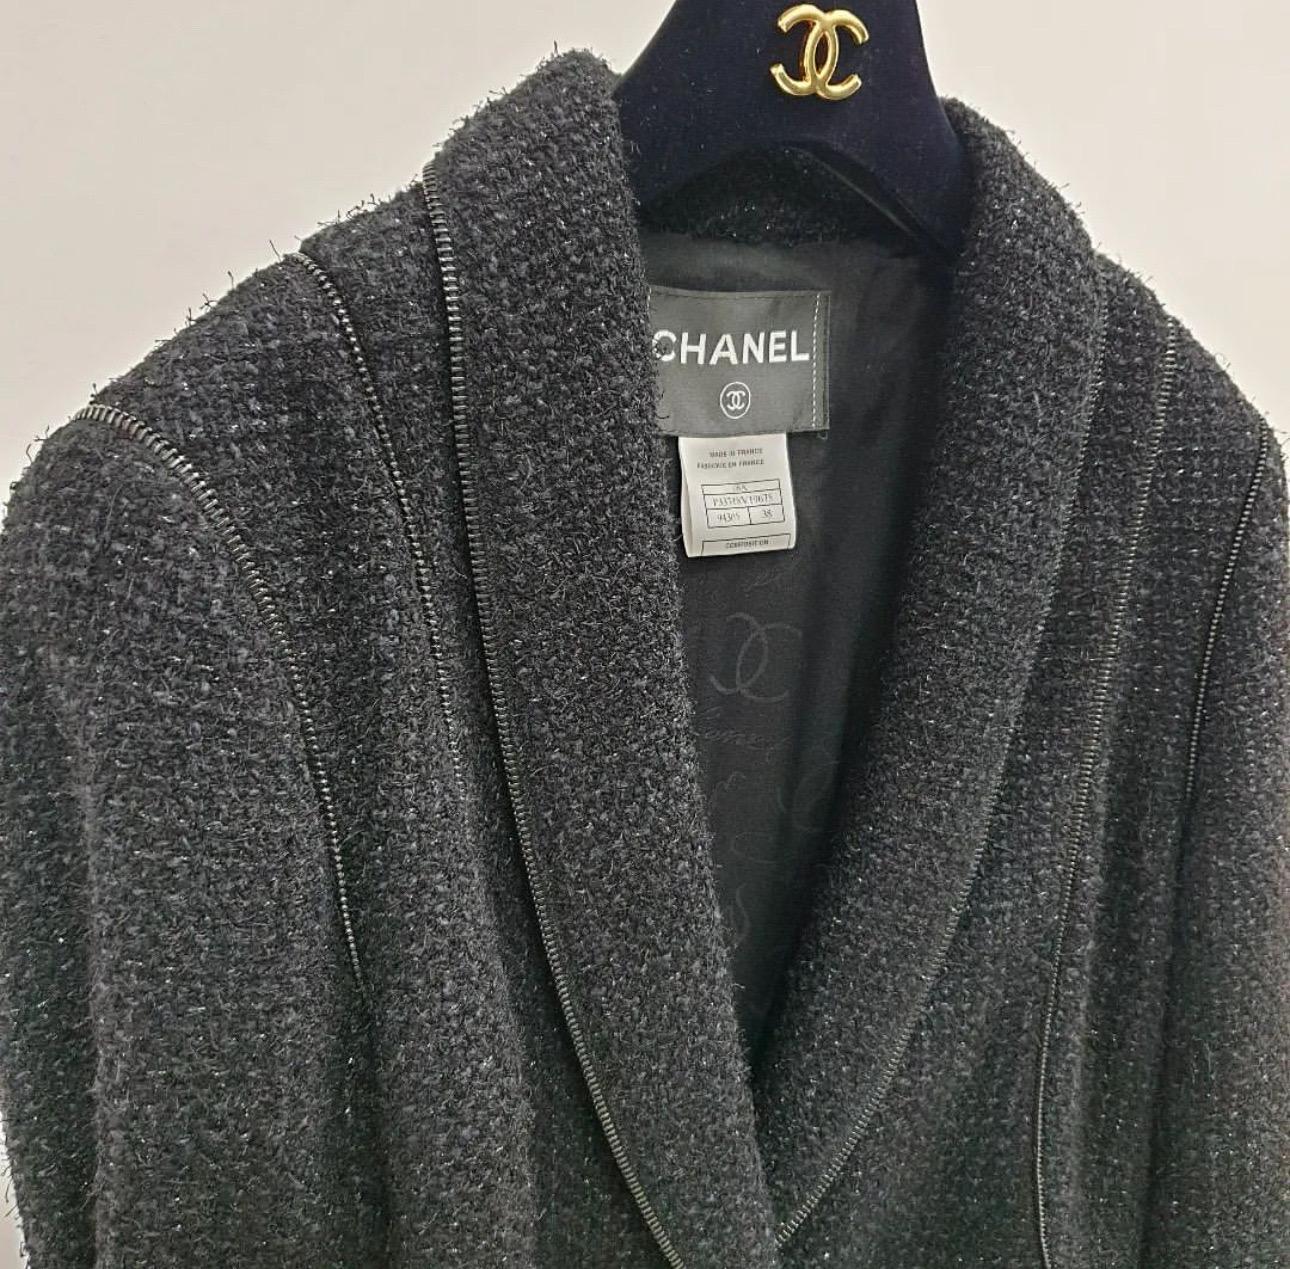 Stunning Chanel black lesage tweed jacket with CC Jewel Gripoux buttons from Paris / LONDON Collection, Metiers d'Art
sz.38
Excellent condition.